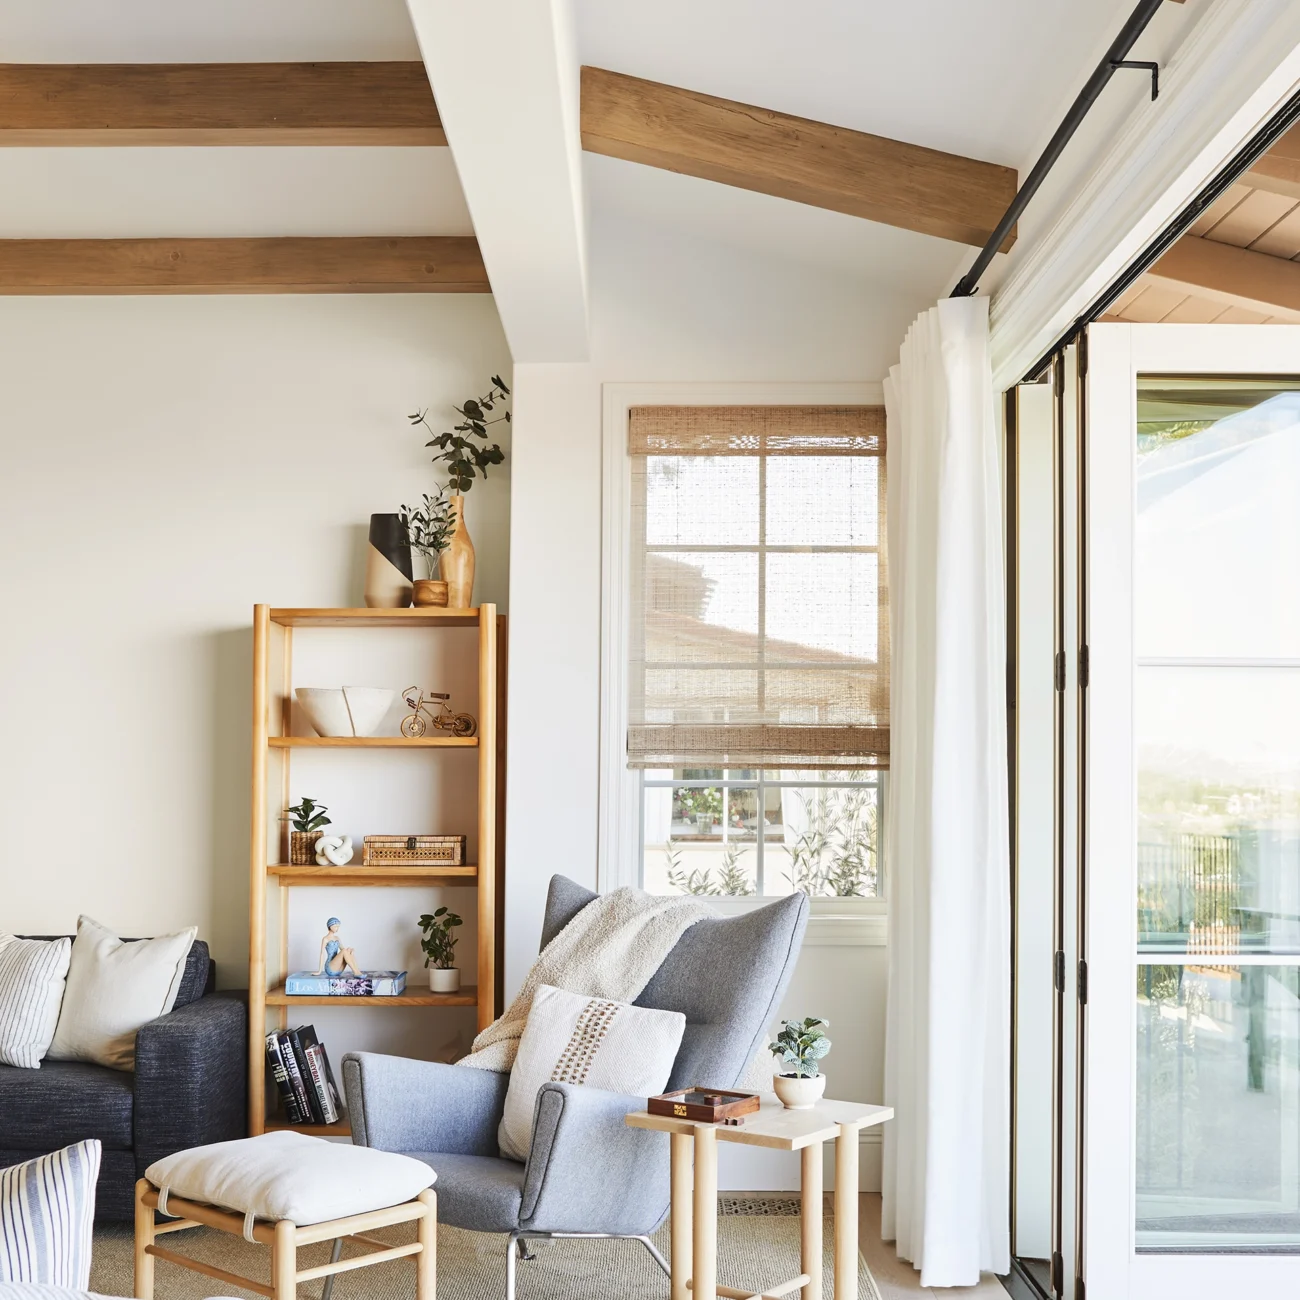 Christine Vroom Interiors | Via Almar | Costal Bright living room with floor to ceiling windows and doors and exposed beams